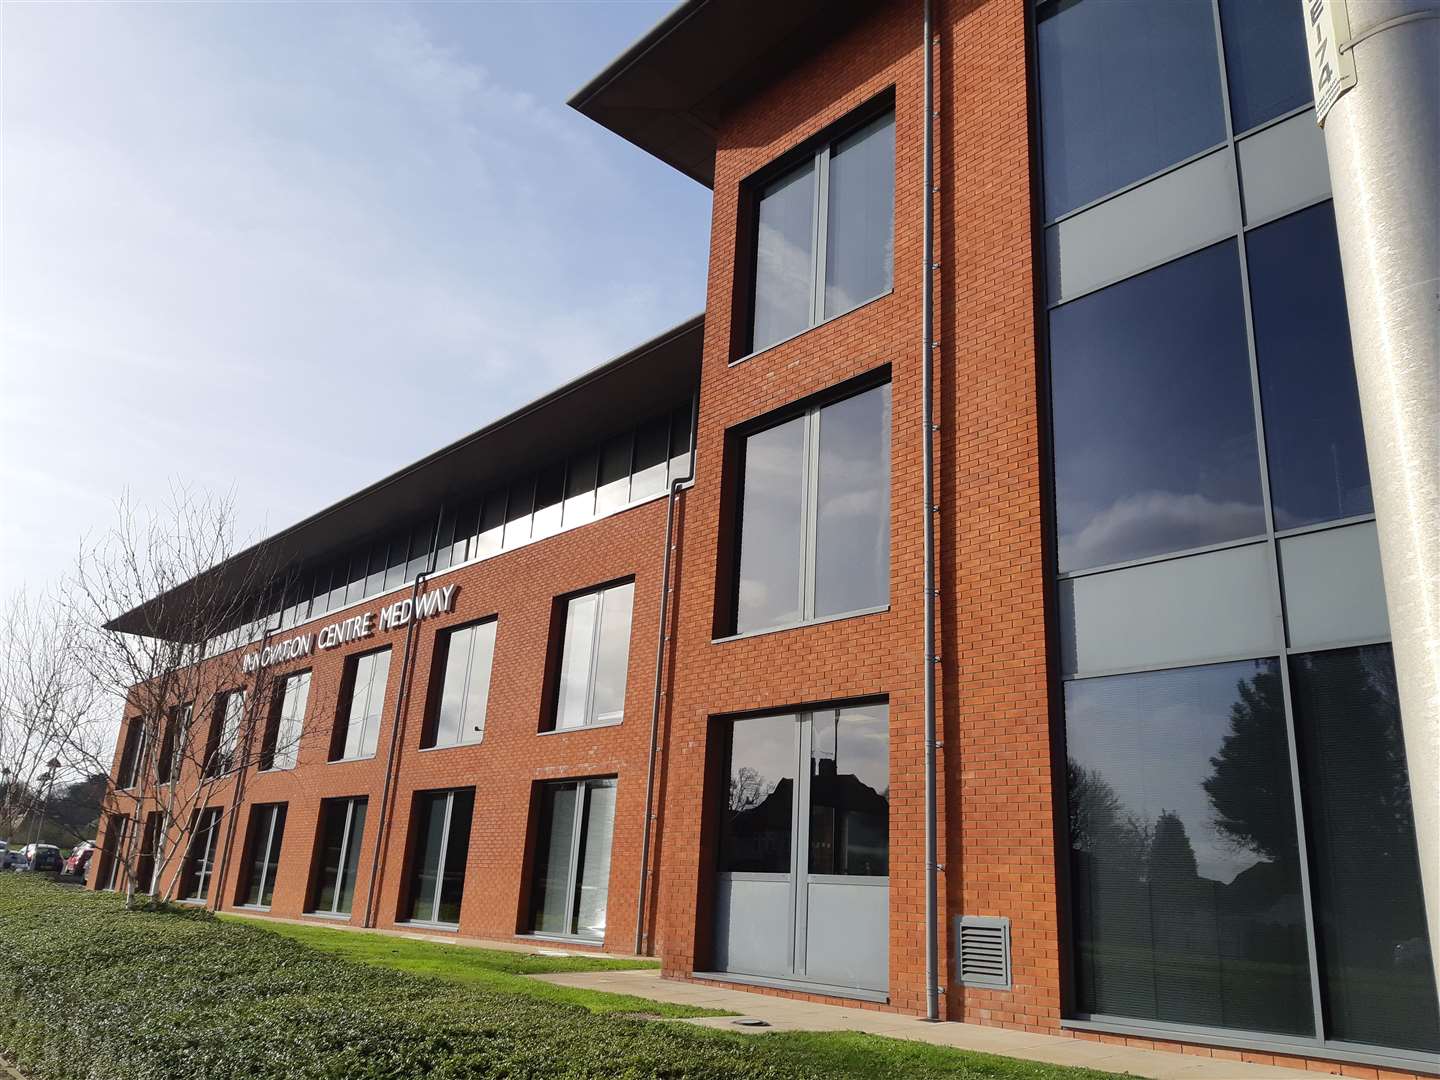 Medway Commerical Group is based at the Innovation Park